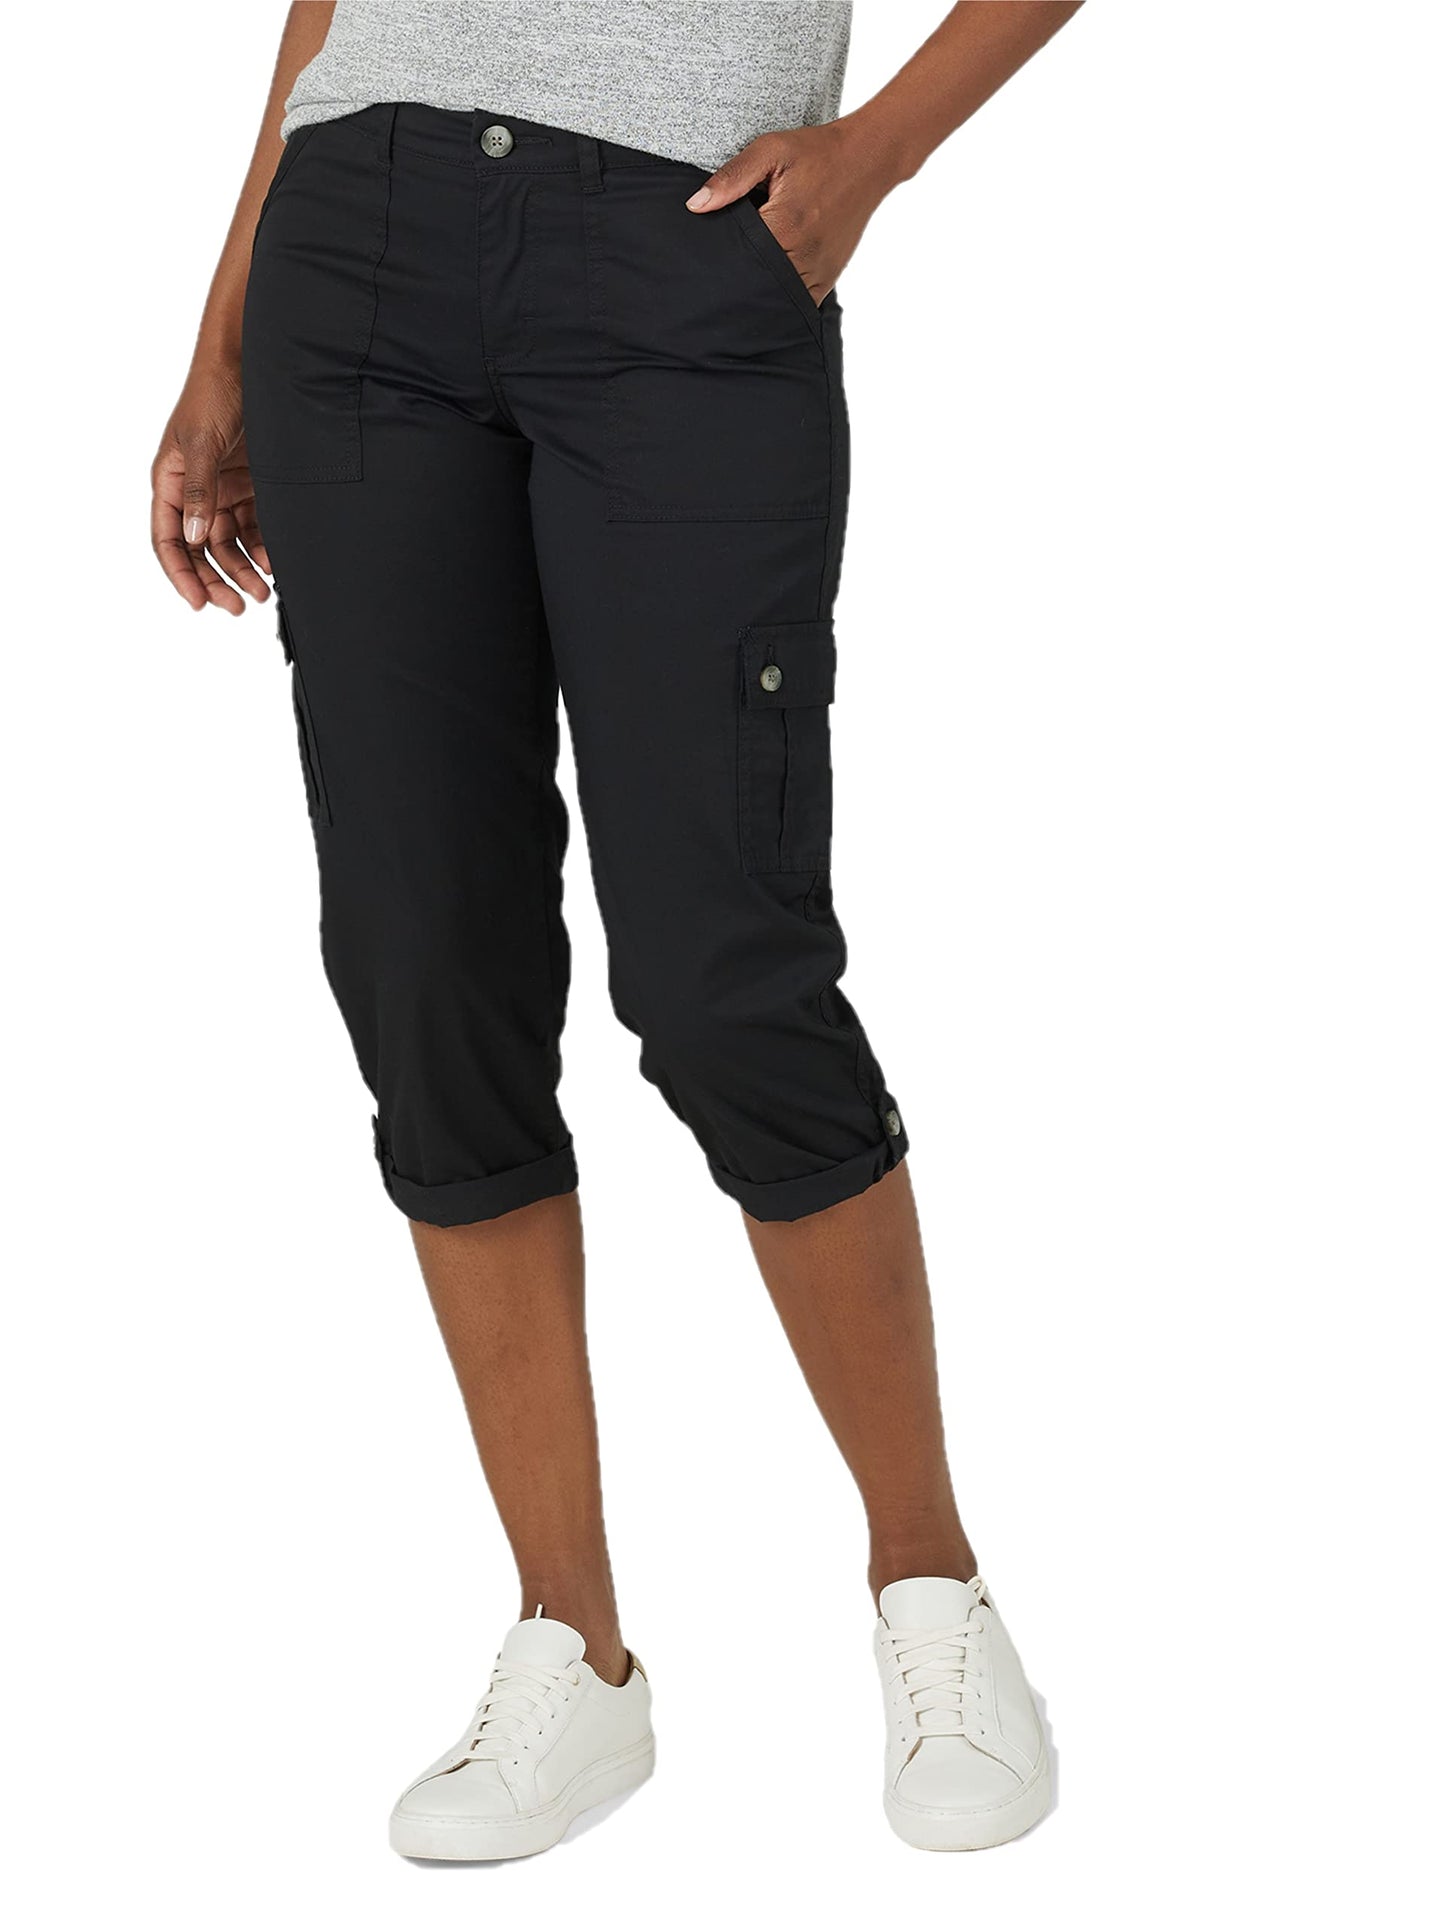 Lee Women's Flex-to-Go Mid-Rise Relaxed Fit Cargo Capri Pant, Black, 14